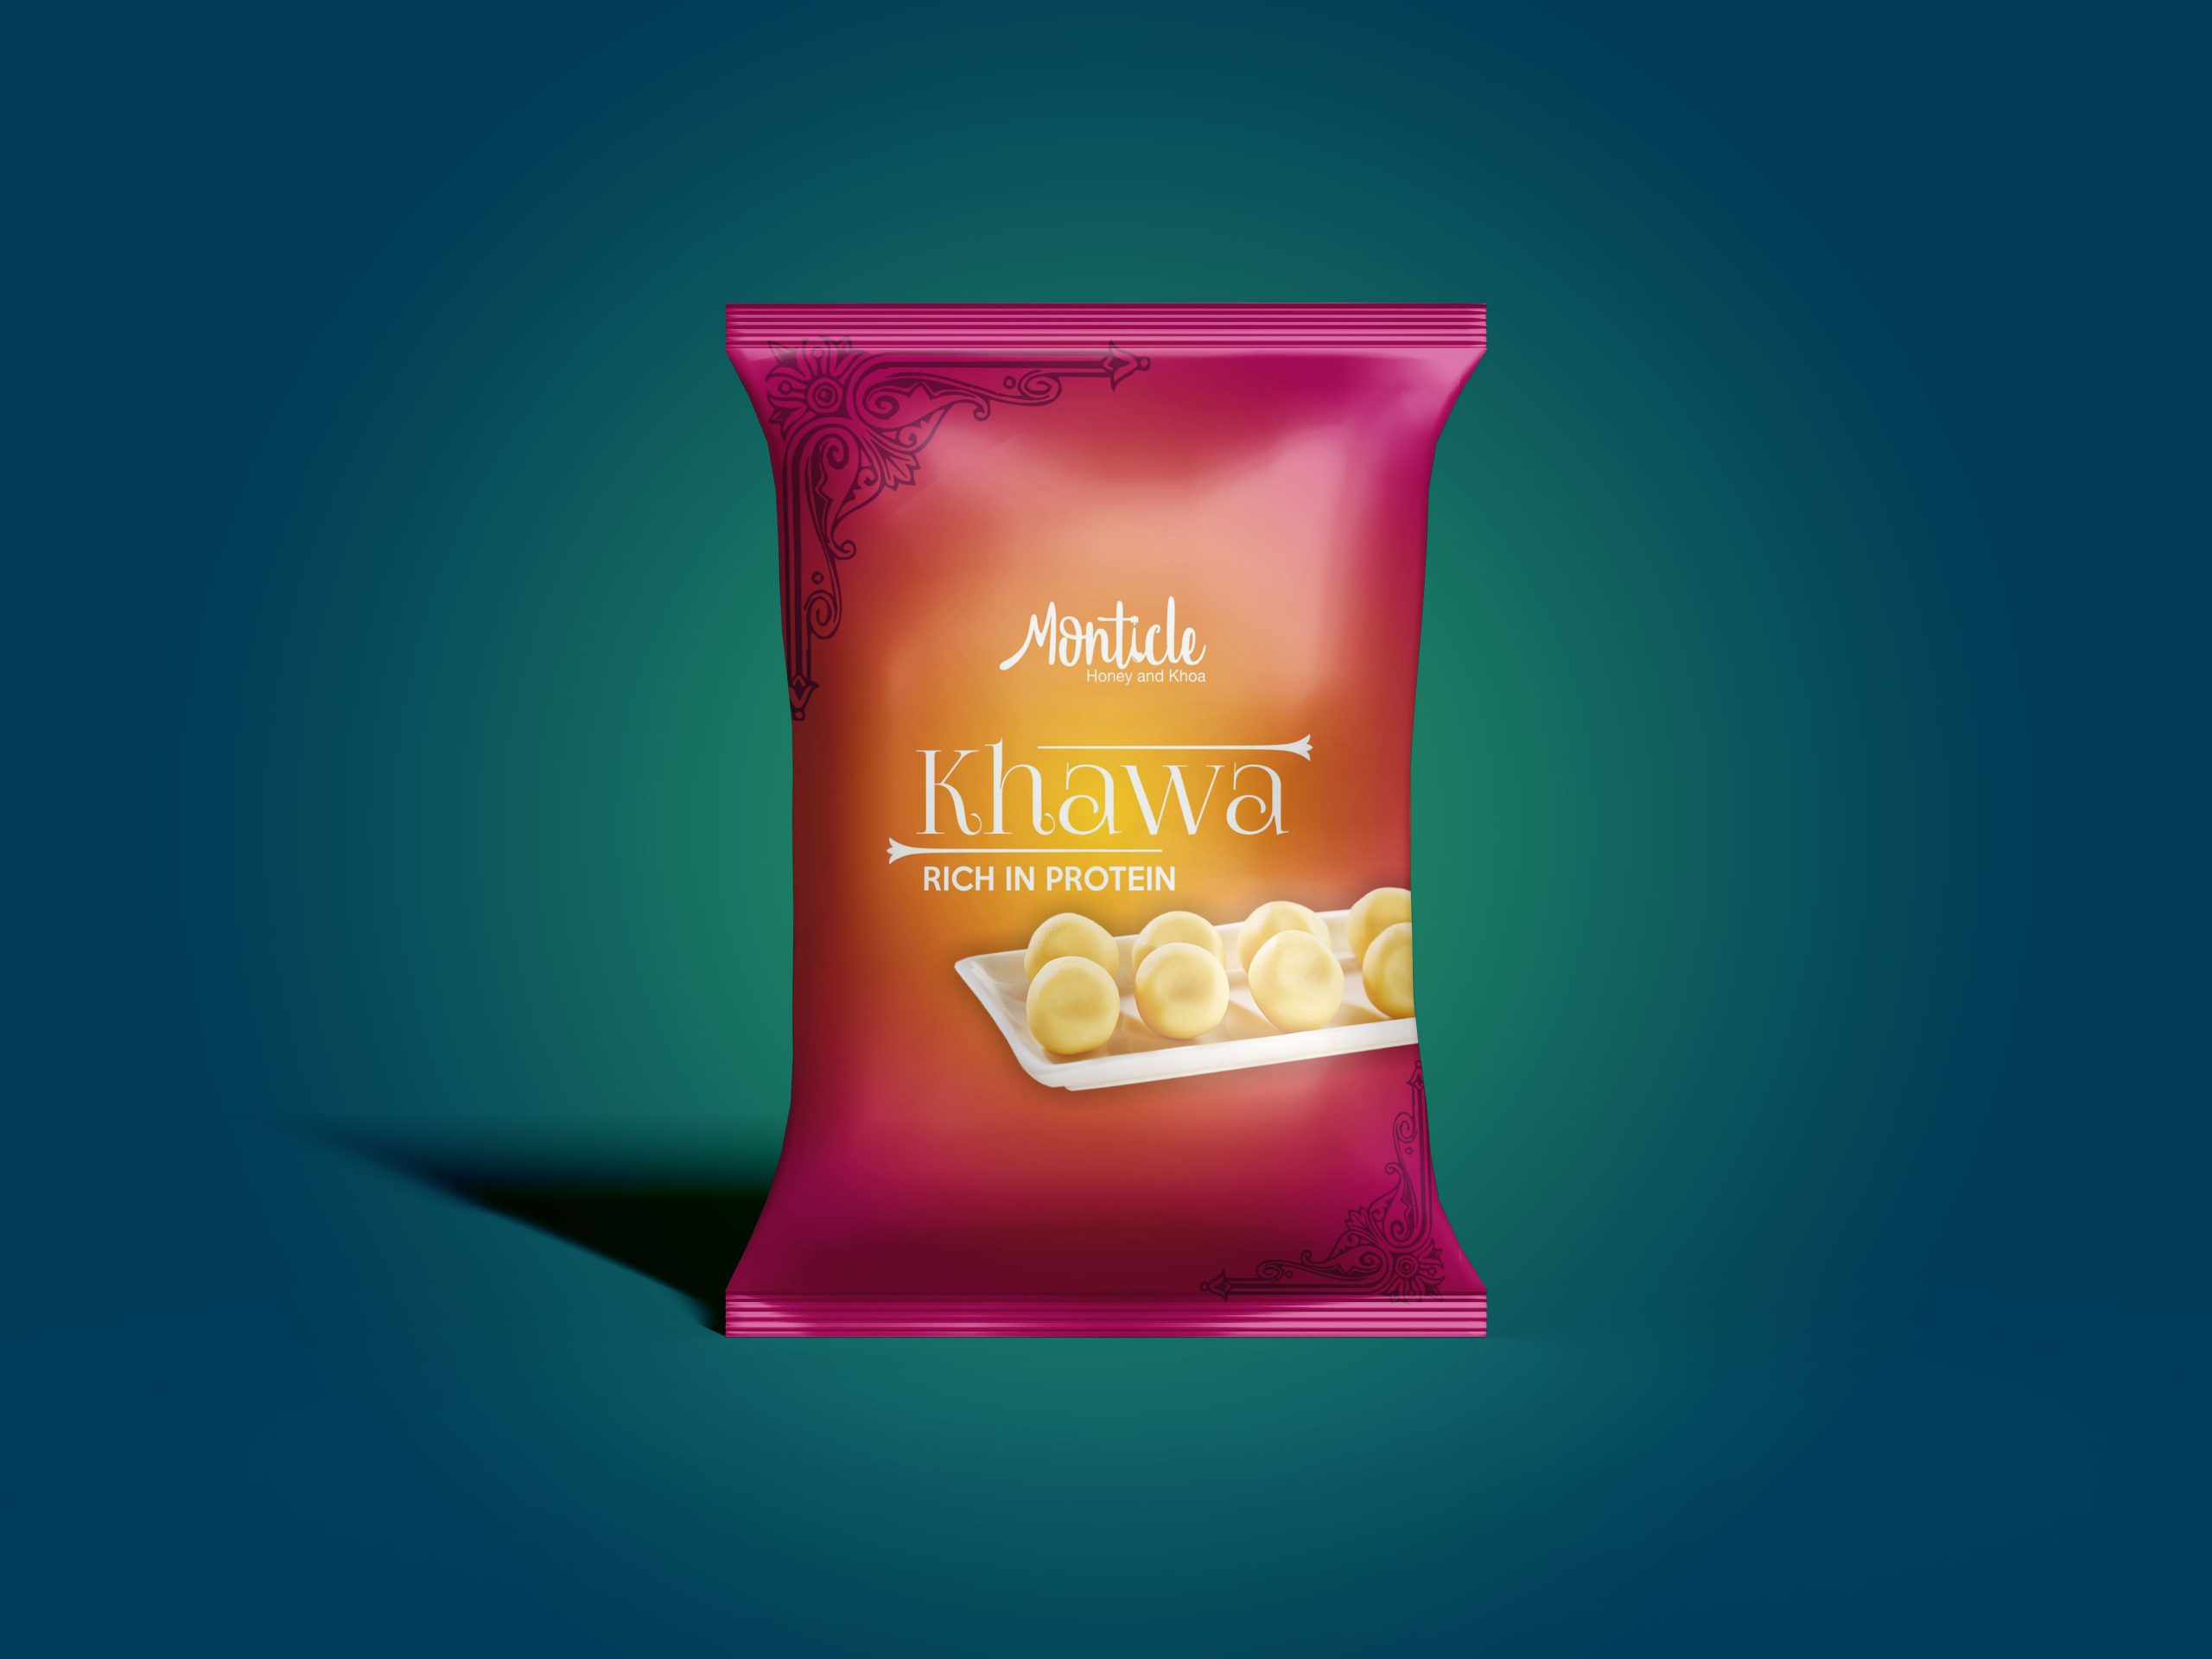 Moticle Khawa Packaging Design by WDSOFT